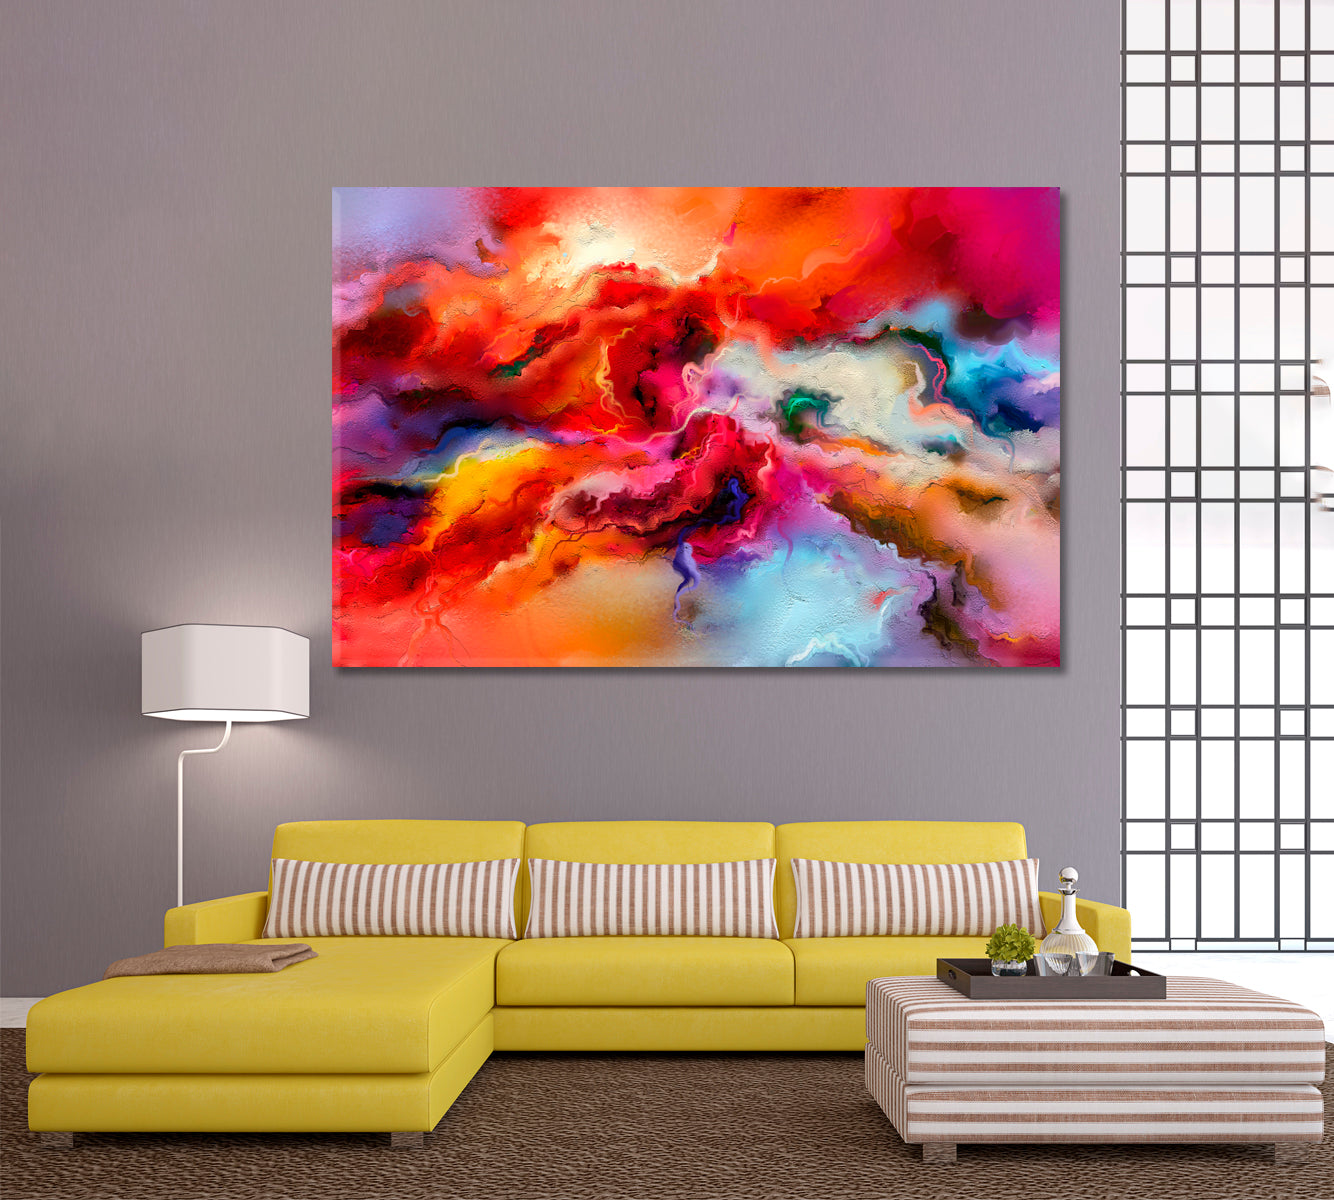 Bright Abstract Design Skyscape Canvas Artesty 1 panel 24" x 16" 